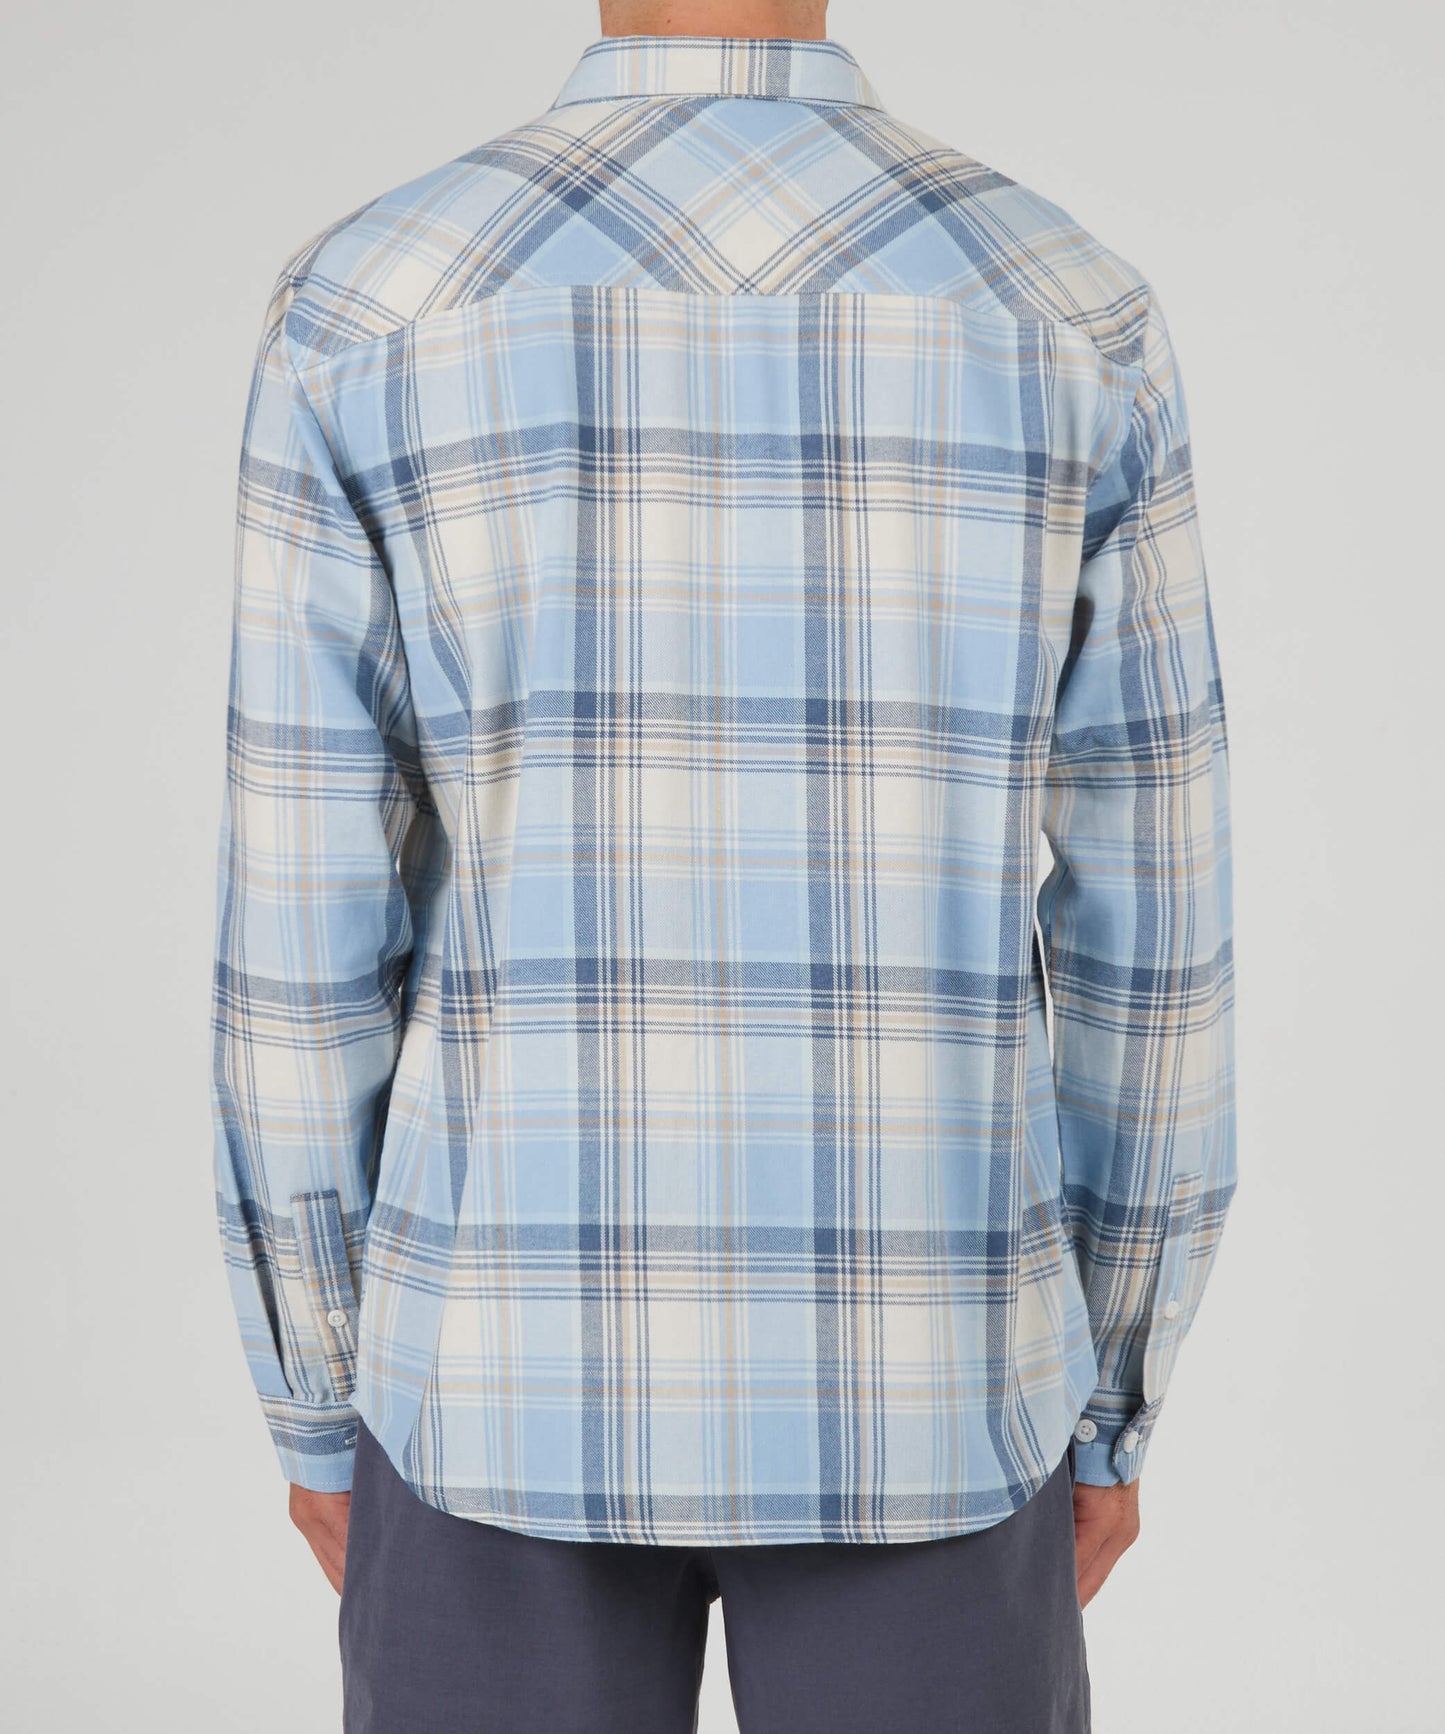 Salty crew WOVEN SHIRTS Frothing Flannel - Wax/Blue in Wax/Blue